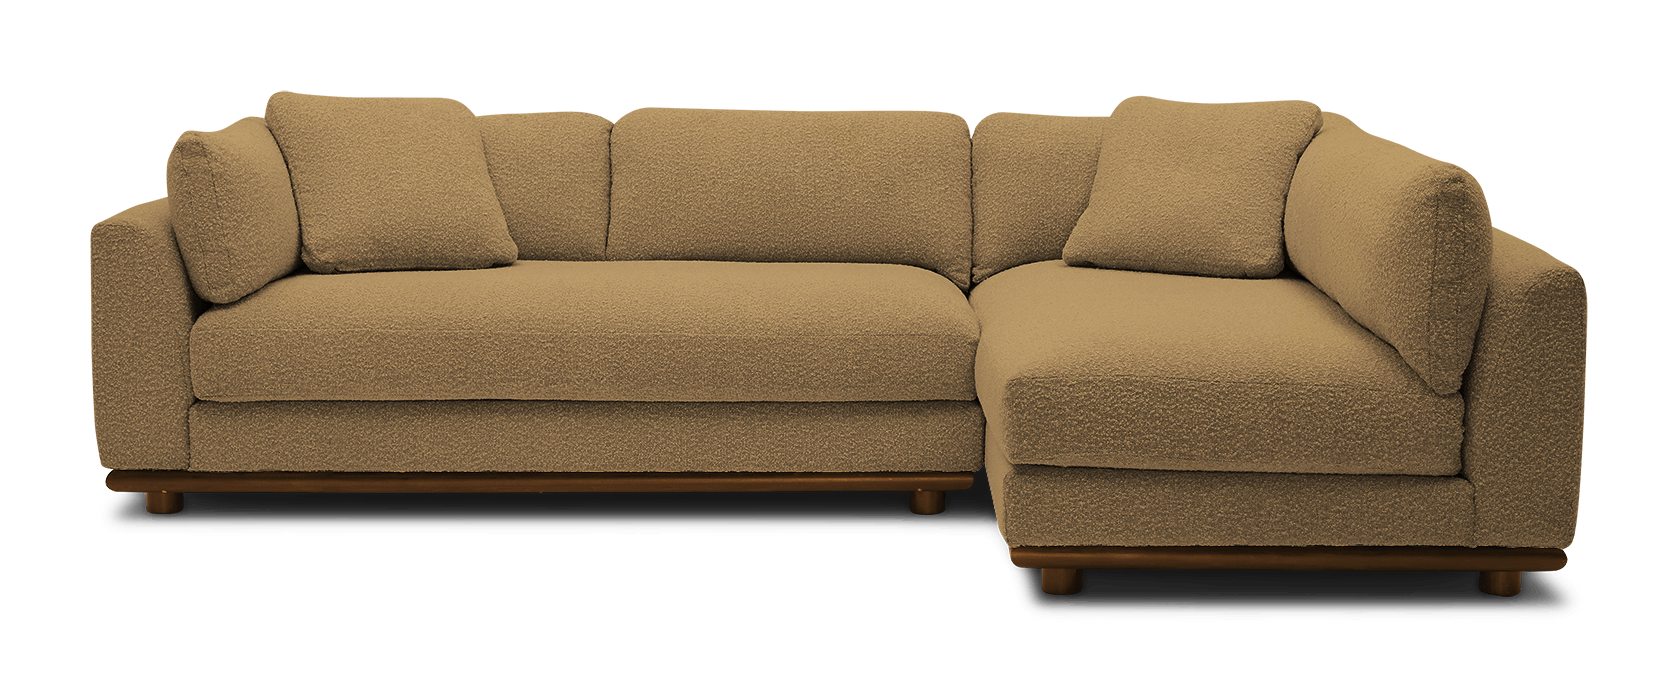 miller sectional banks oatmeal